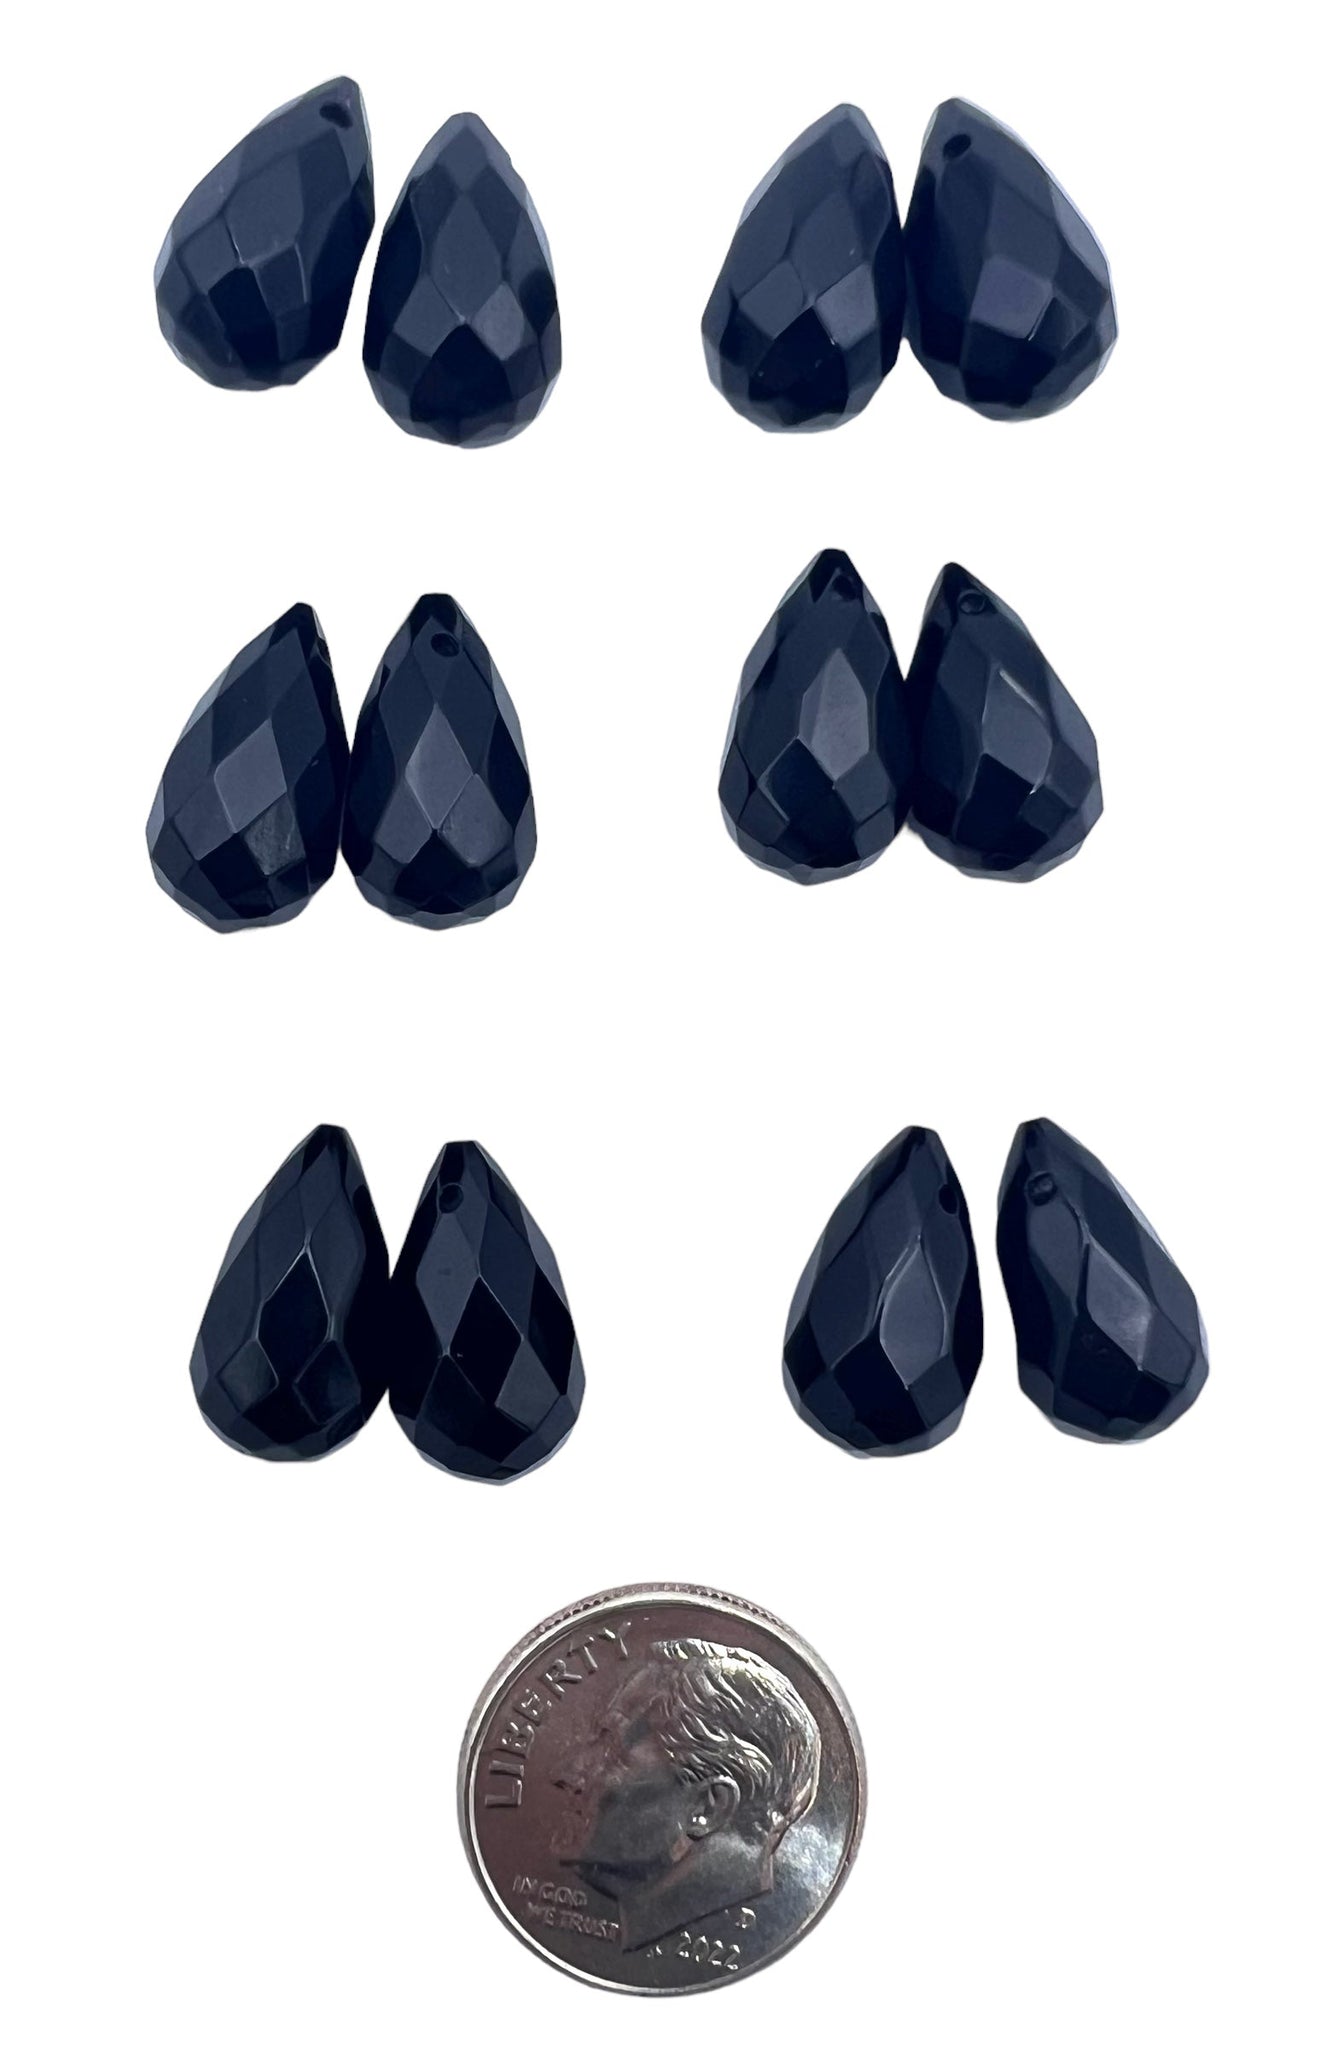 Black Onyx Faceted 8x14mm Briolette Bead Pairs (One Pair) -